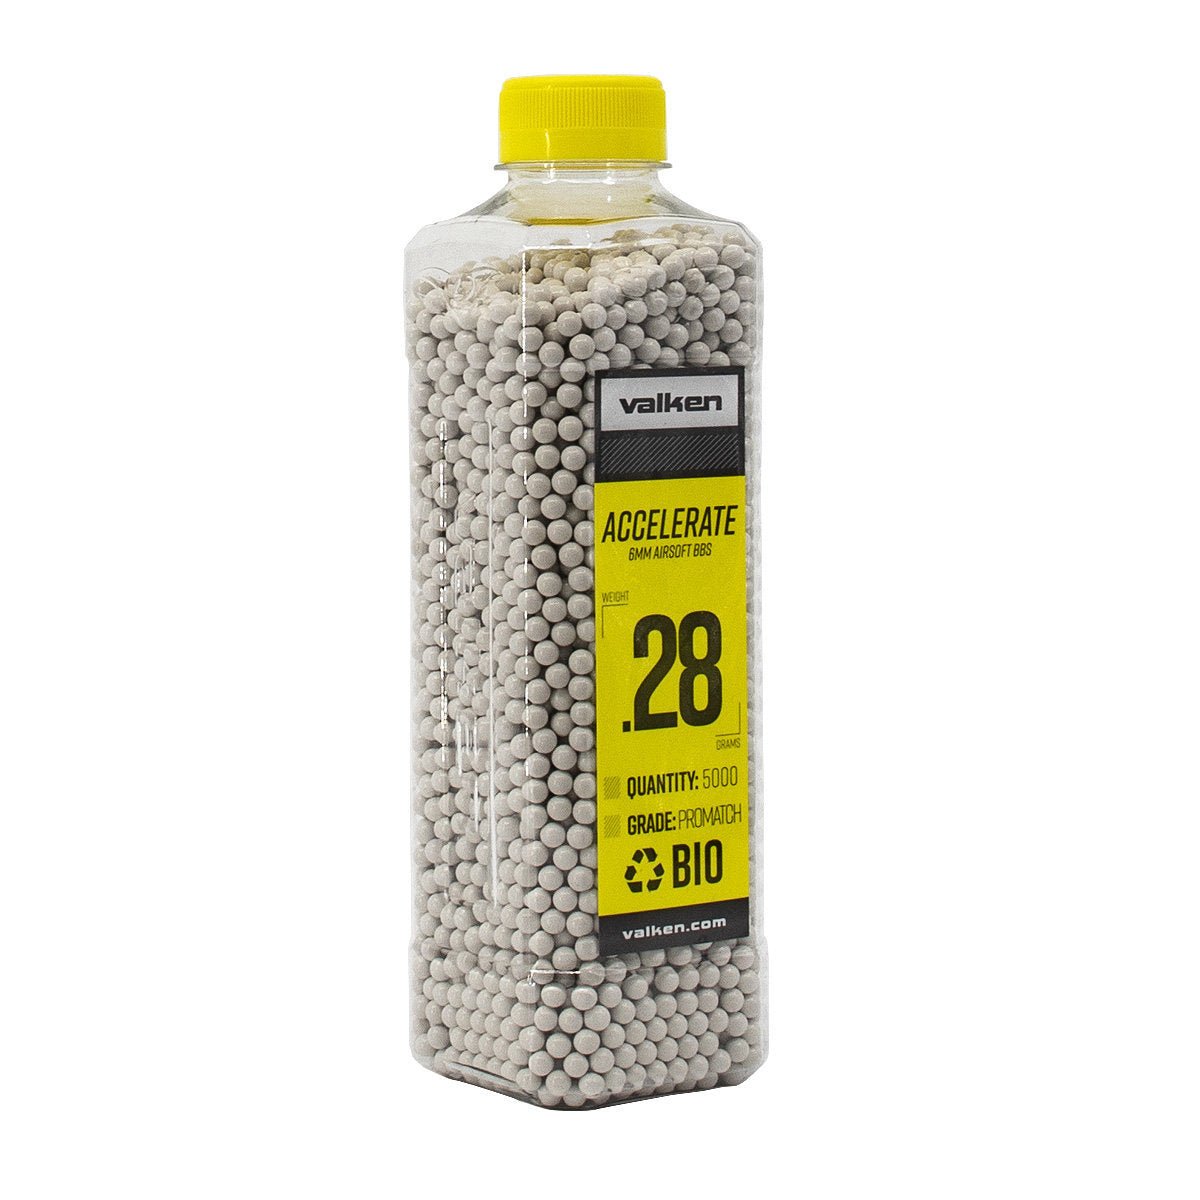 Valken Accelerate ProMatch 0.28g 5,000ct Biodegradable Airsoft BBs - Jefe's Airsoft SolutionsbbsMAPNew